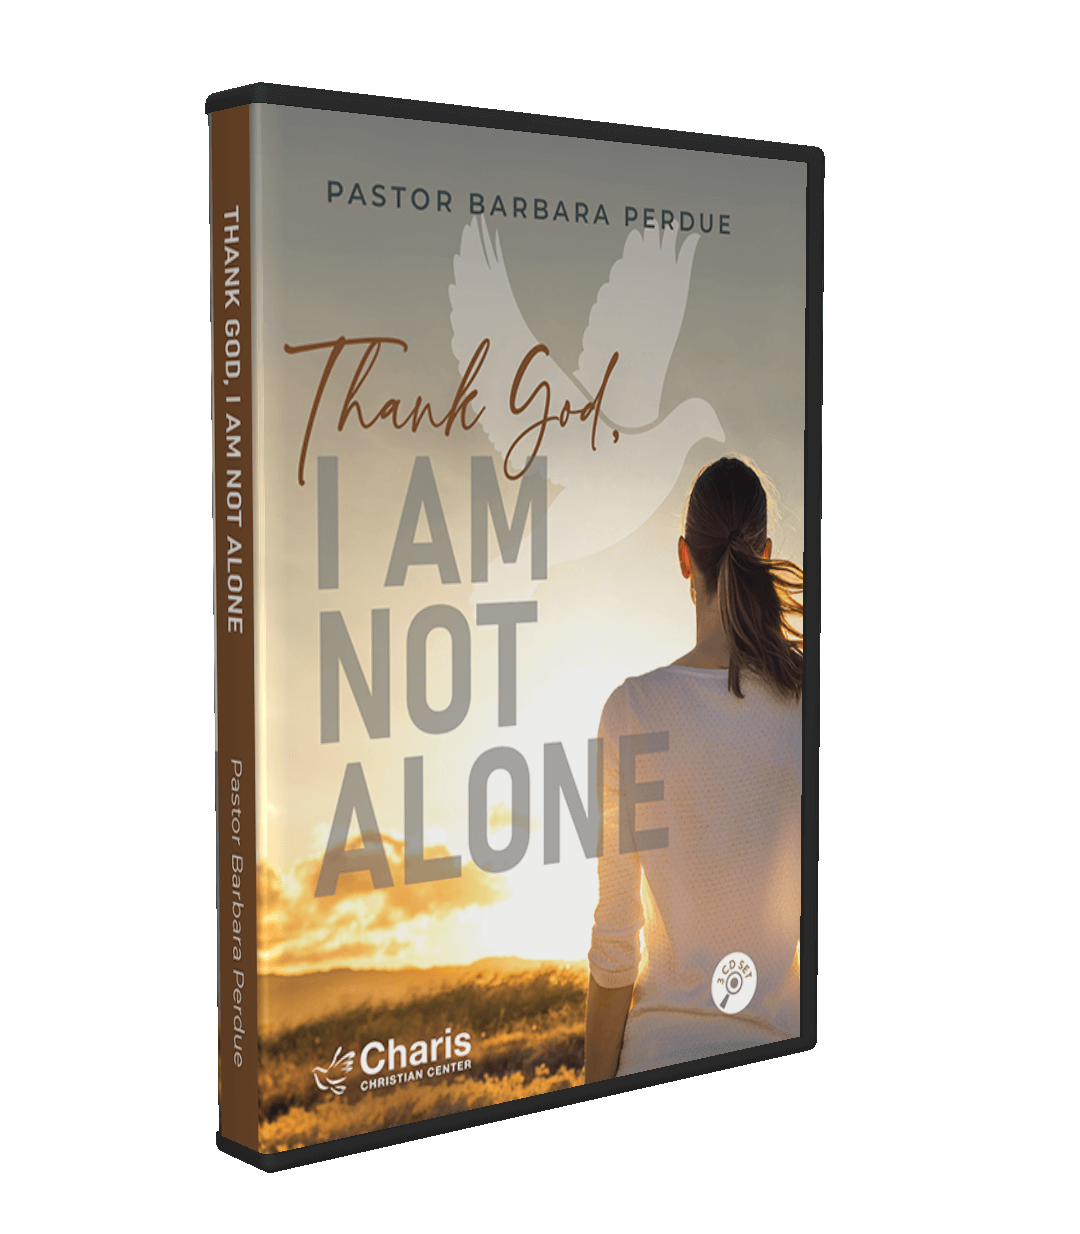 Thank God, I am not alone! 3 CD Set from Pastor Barbara Perdue.